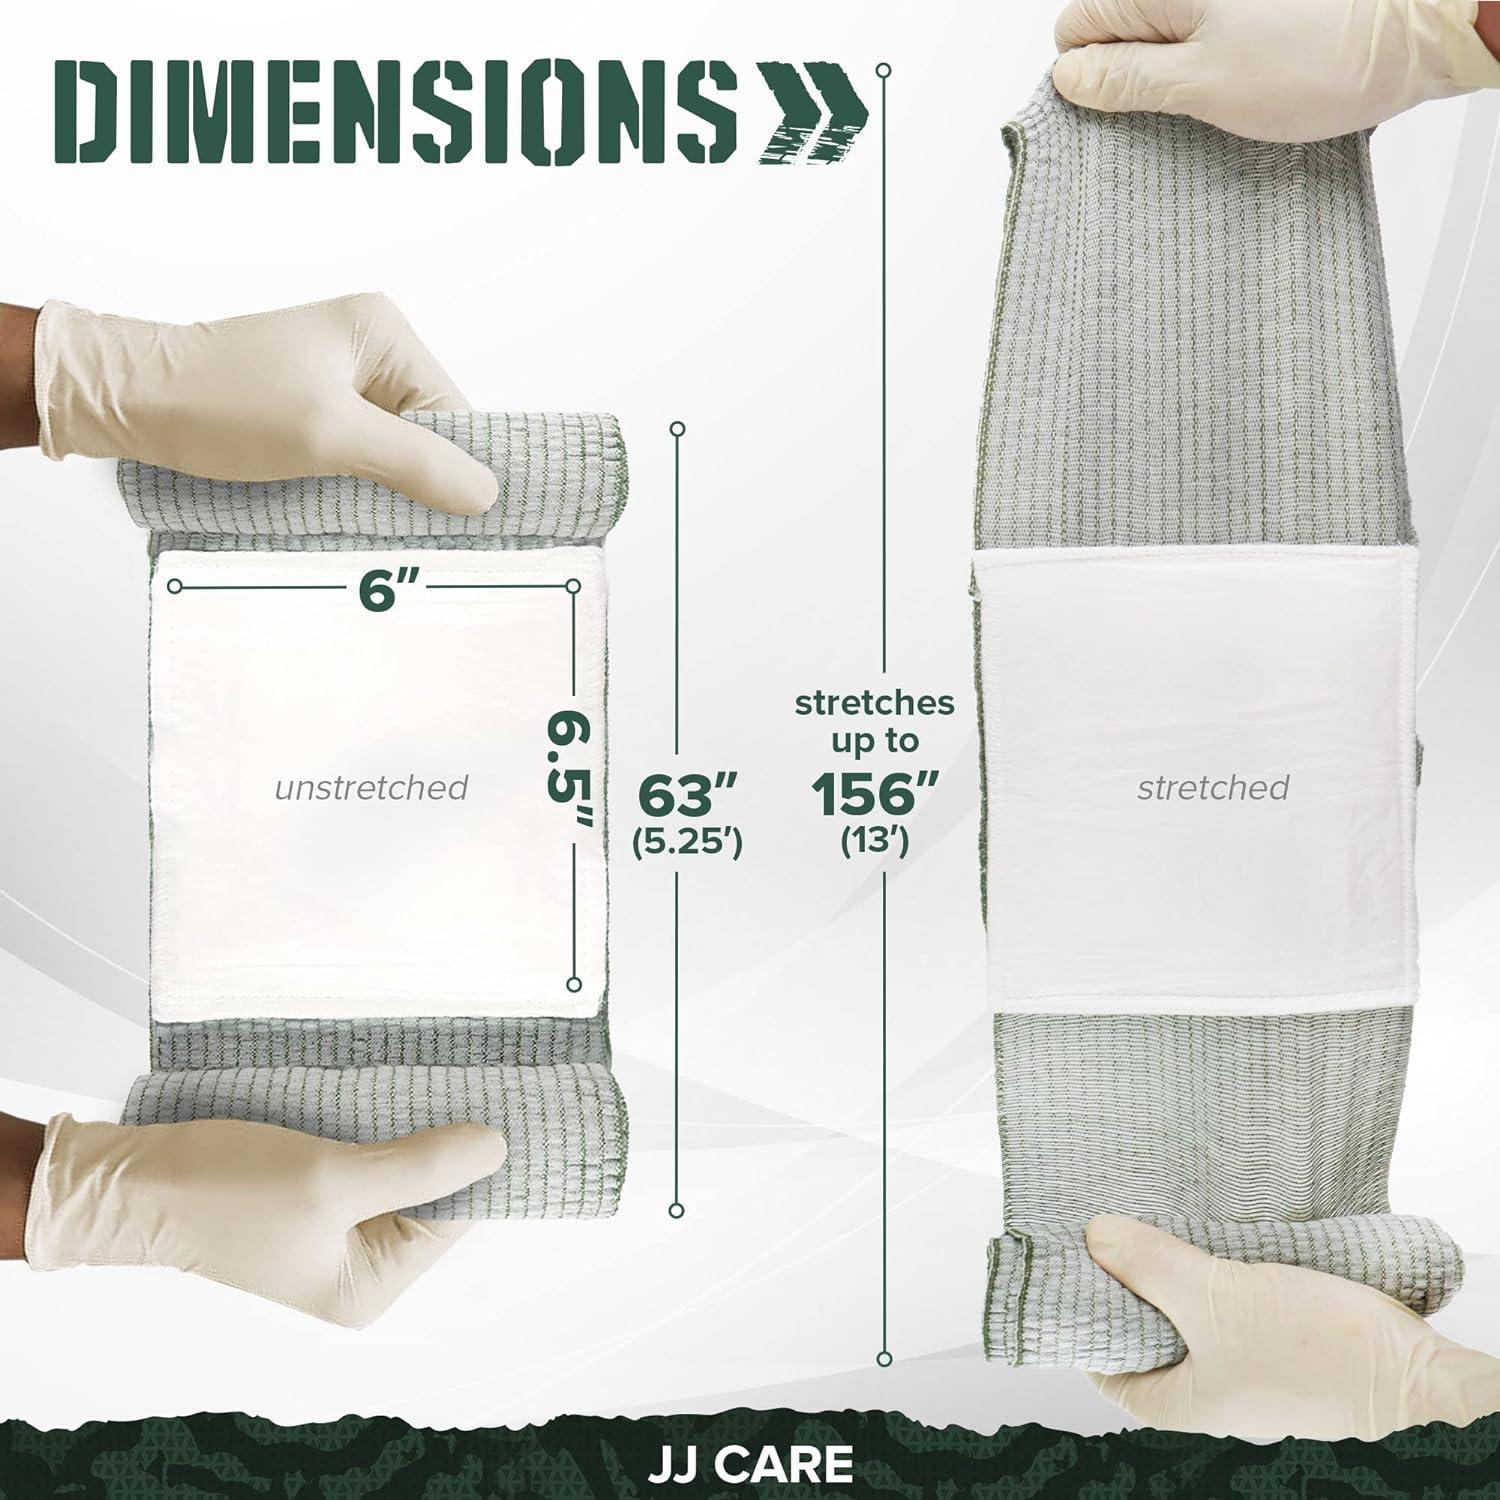 JJ CARE Israeli Bandages 6 inch 6 Pack Israeli Compression Bandage  Individually Packed Emergency Trauma Dressings Sterile & Vacuum Sealed  First Aid Combat Pressure Bandages (Pack of 6) 6 x 6.5 inches each